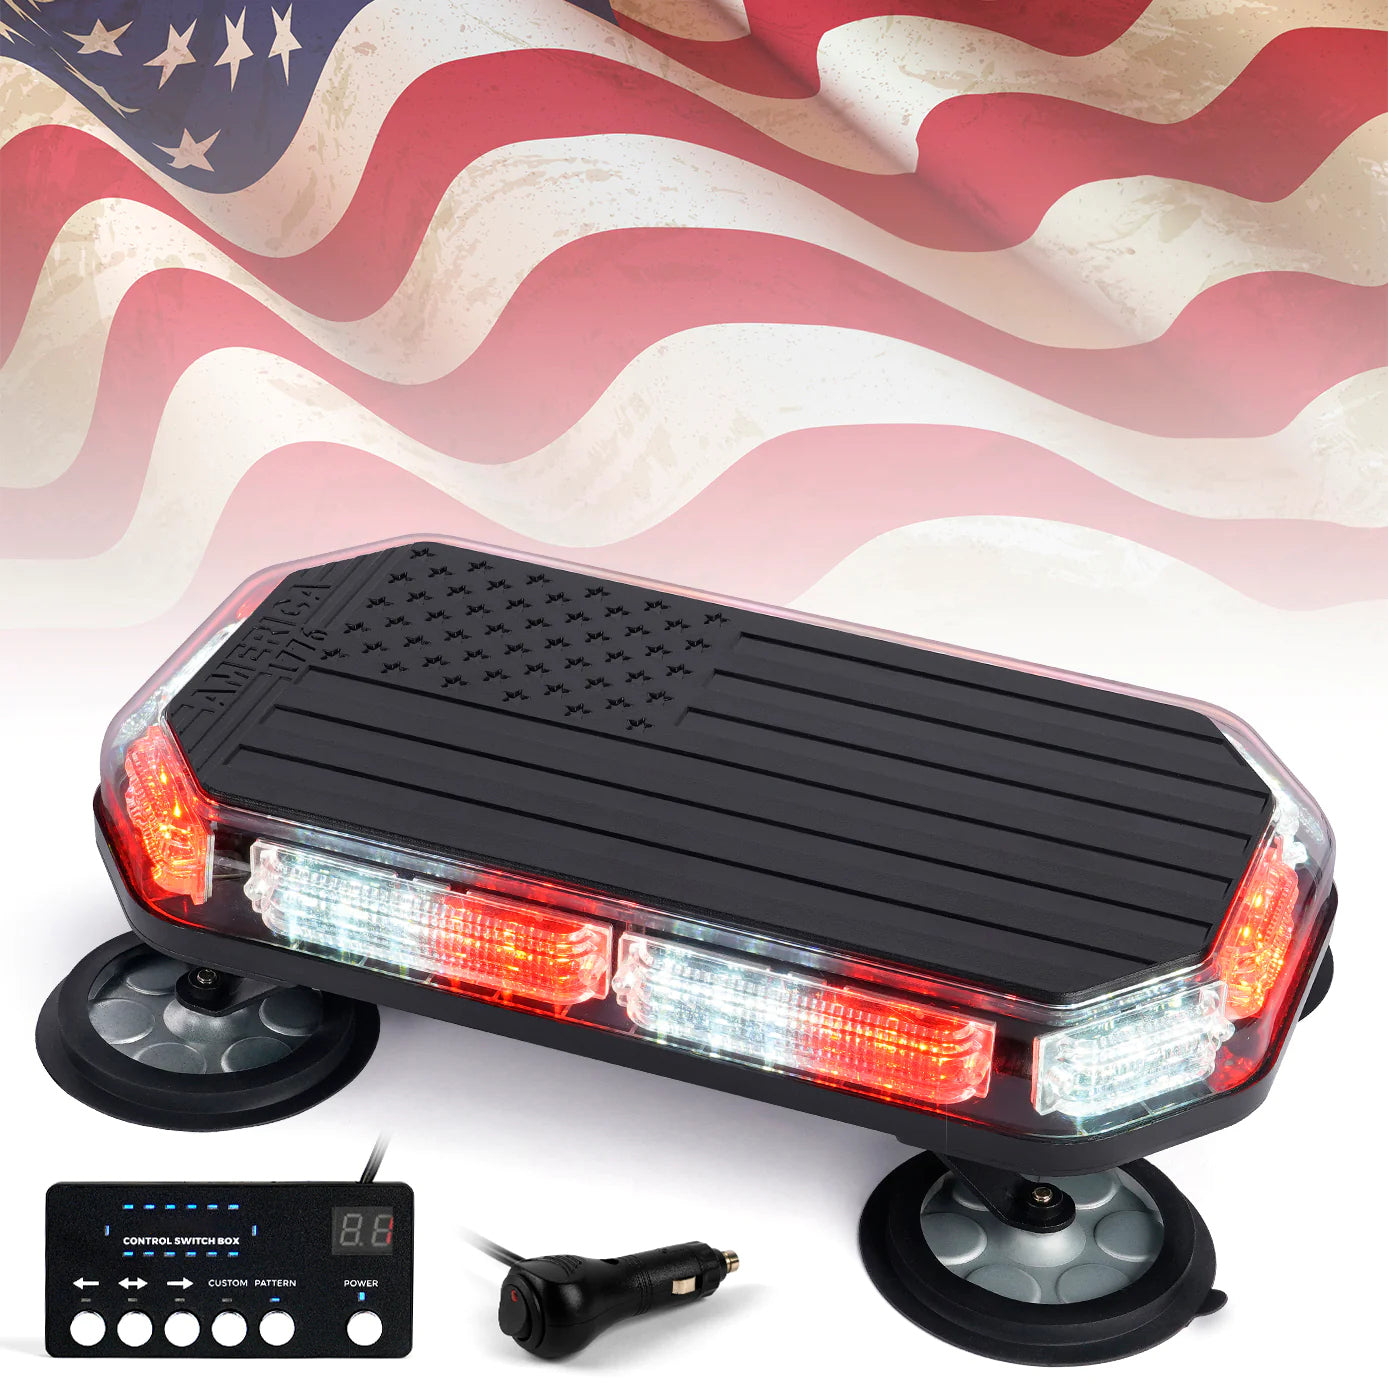 LED Rooftop Strobe Light with American Flag Design